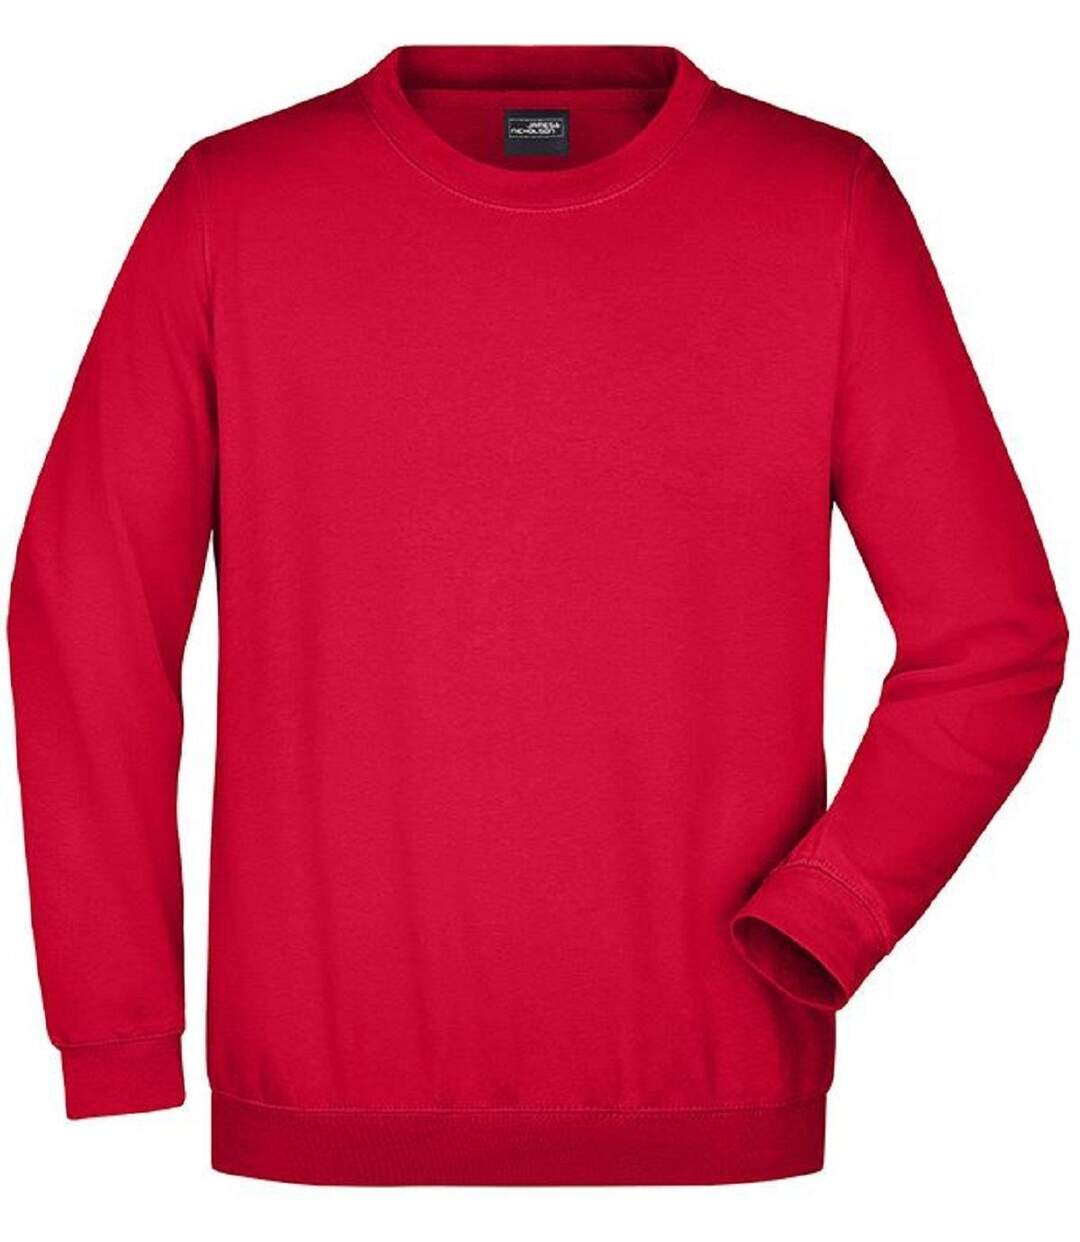 Sweat-shirt col rond - JN040 - rouge - mixte homme femme